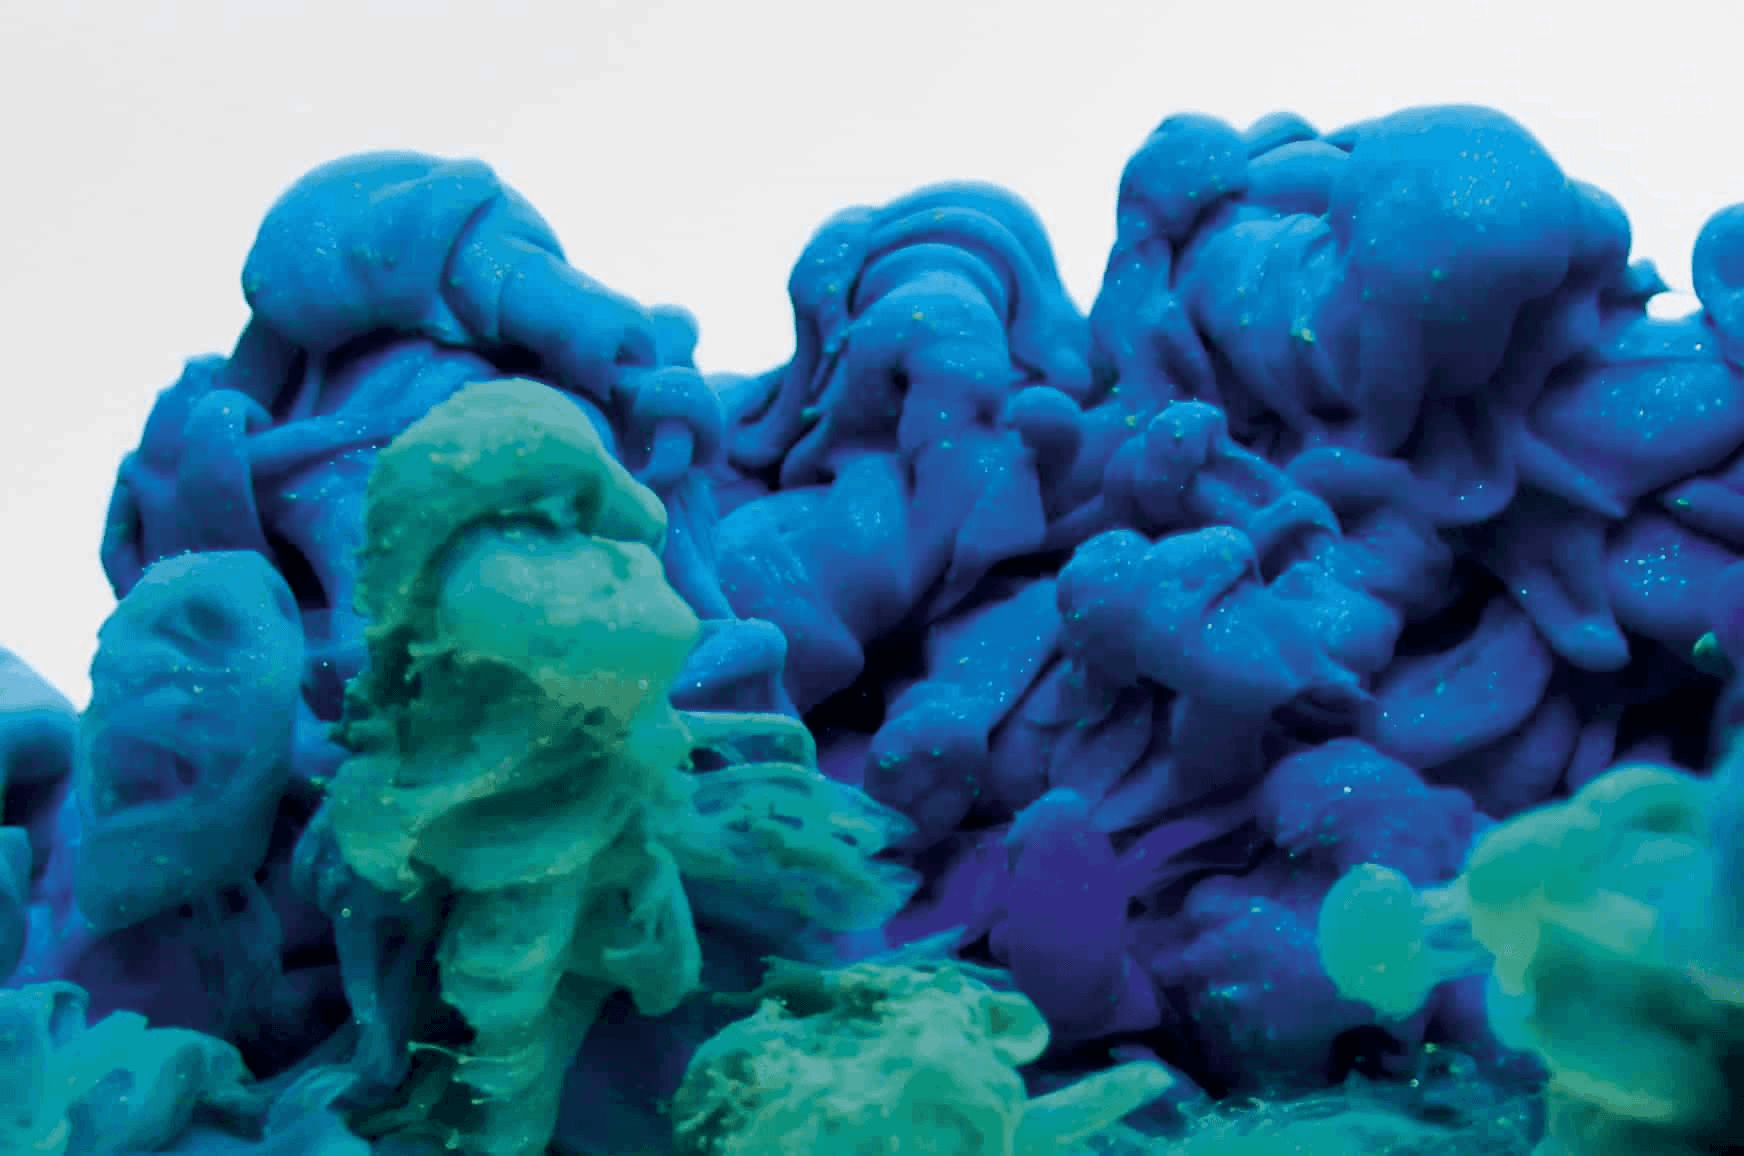 A close-up view of vibrant blue and turquoise slime or putty with a gooey and amorphous texture.